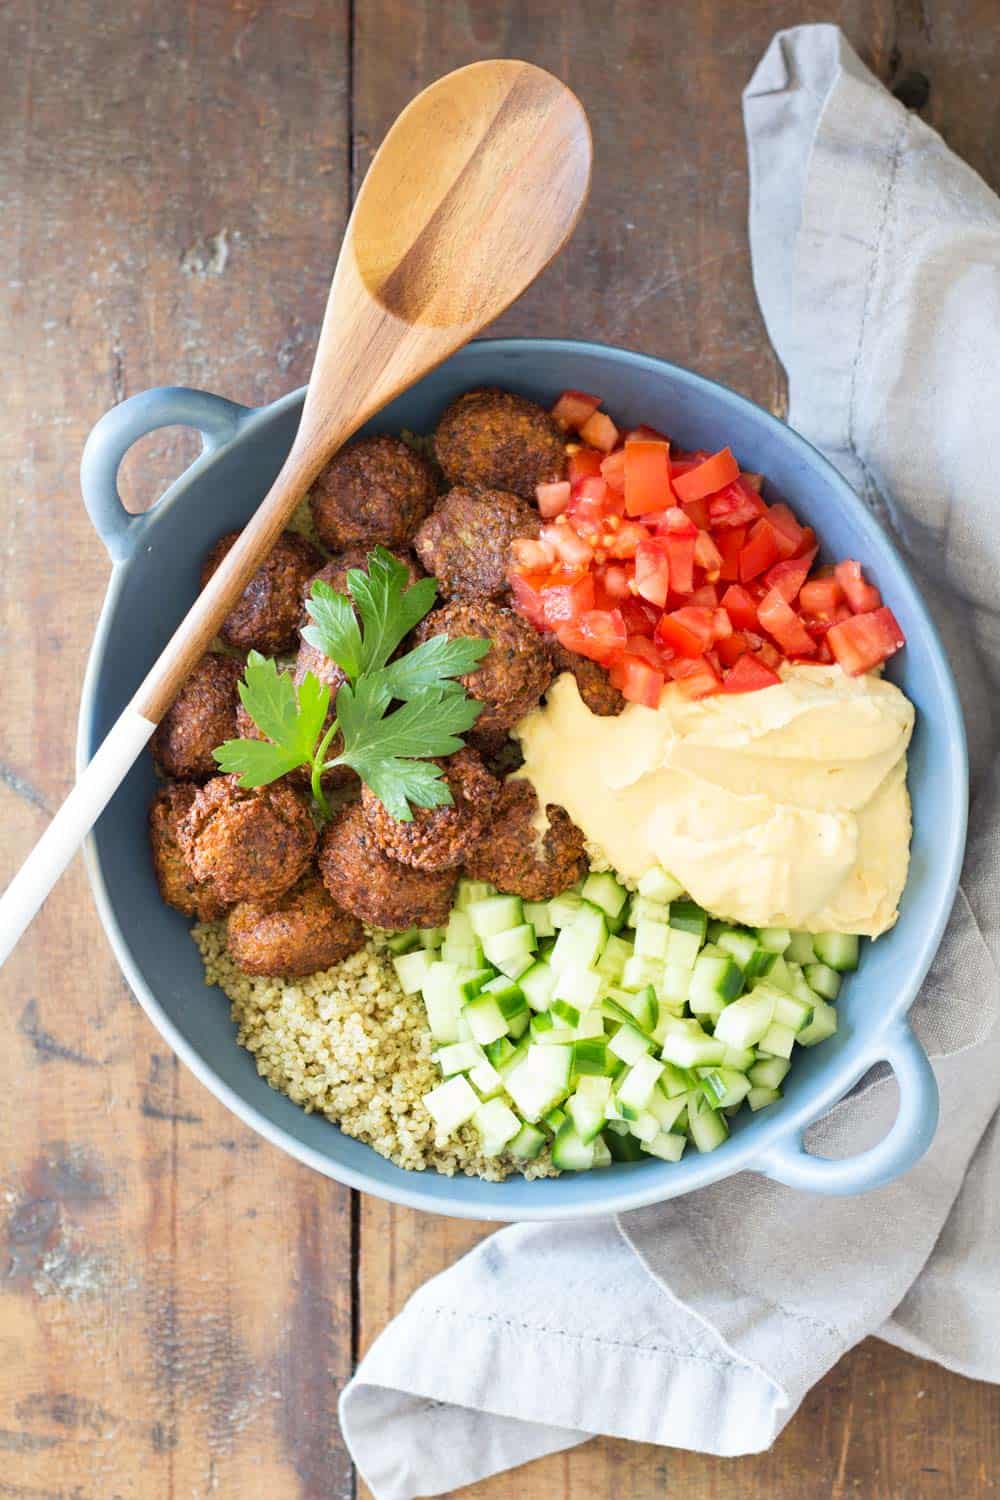 Top view of Vegan Quinoa Falafel Bowl garnished with fresh parsley, and a wooden spoon.